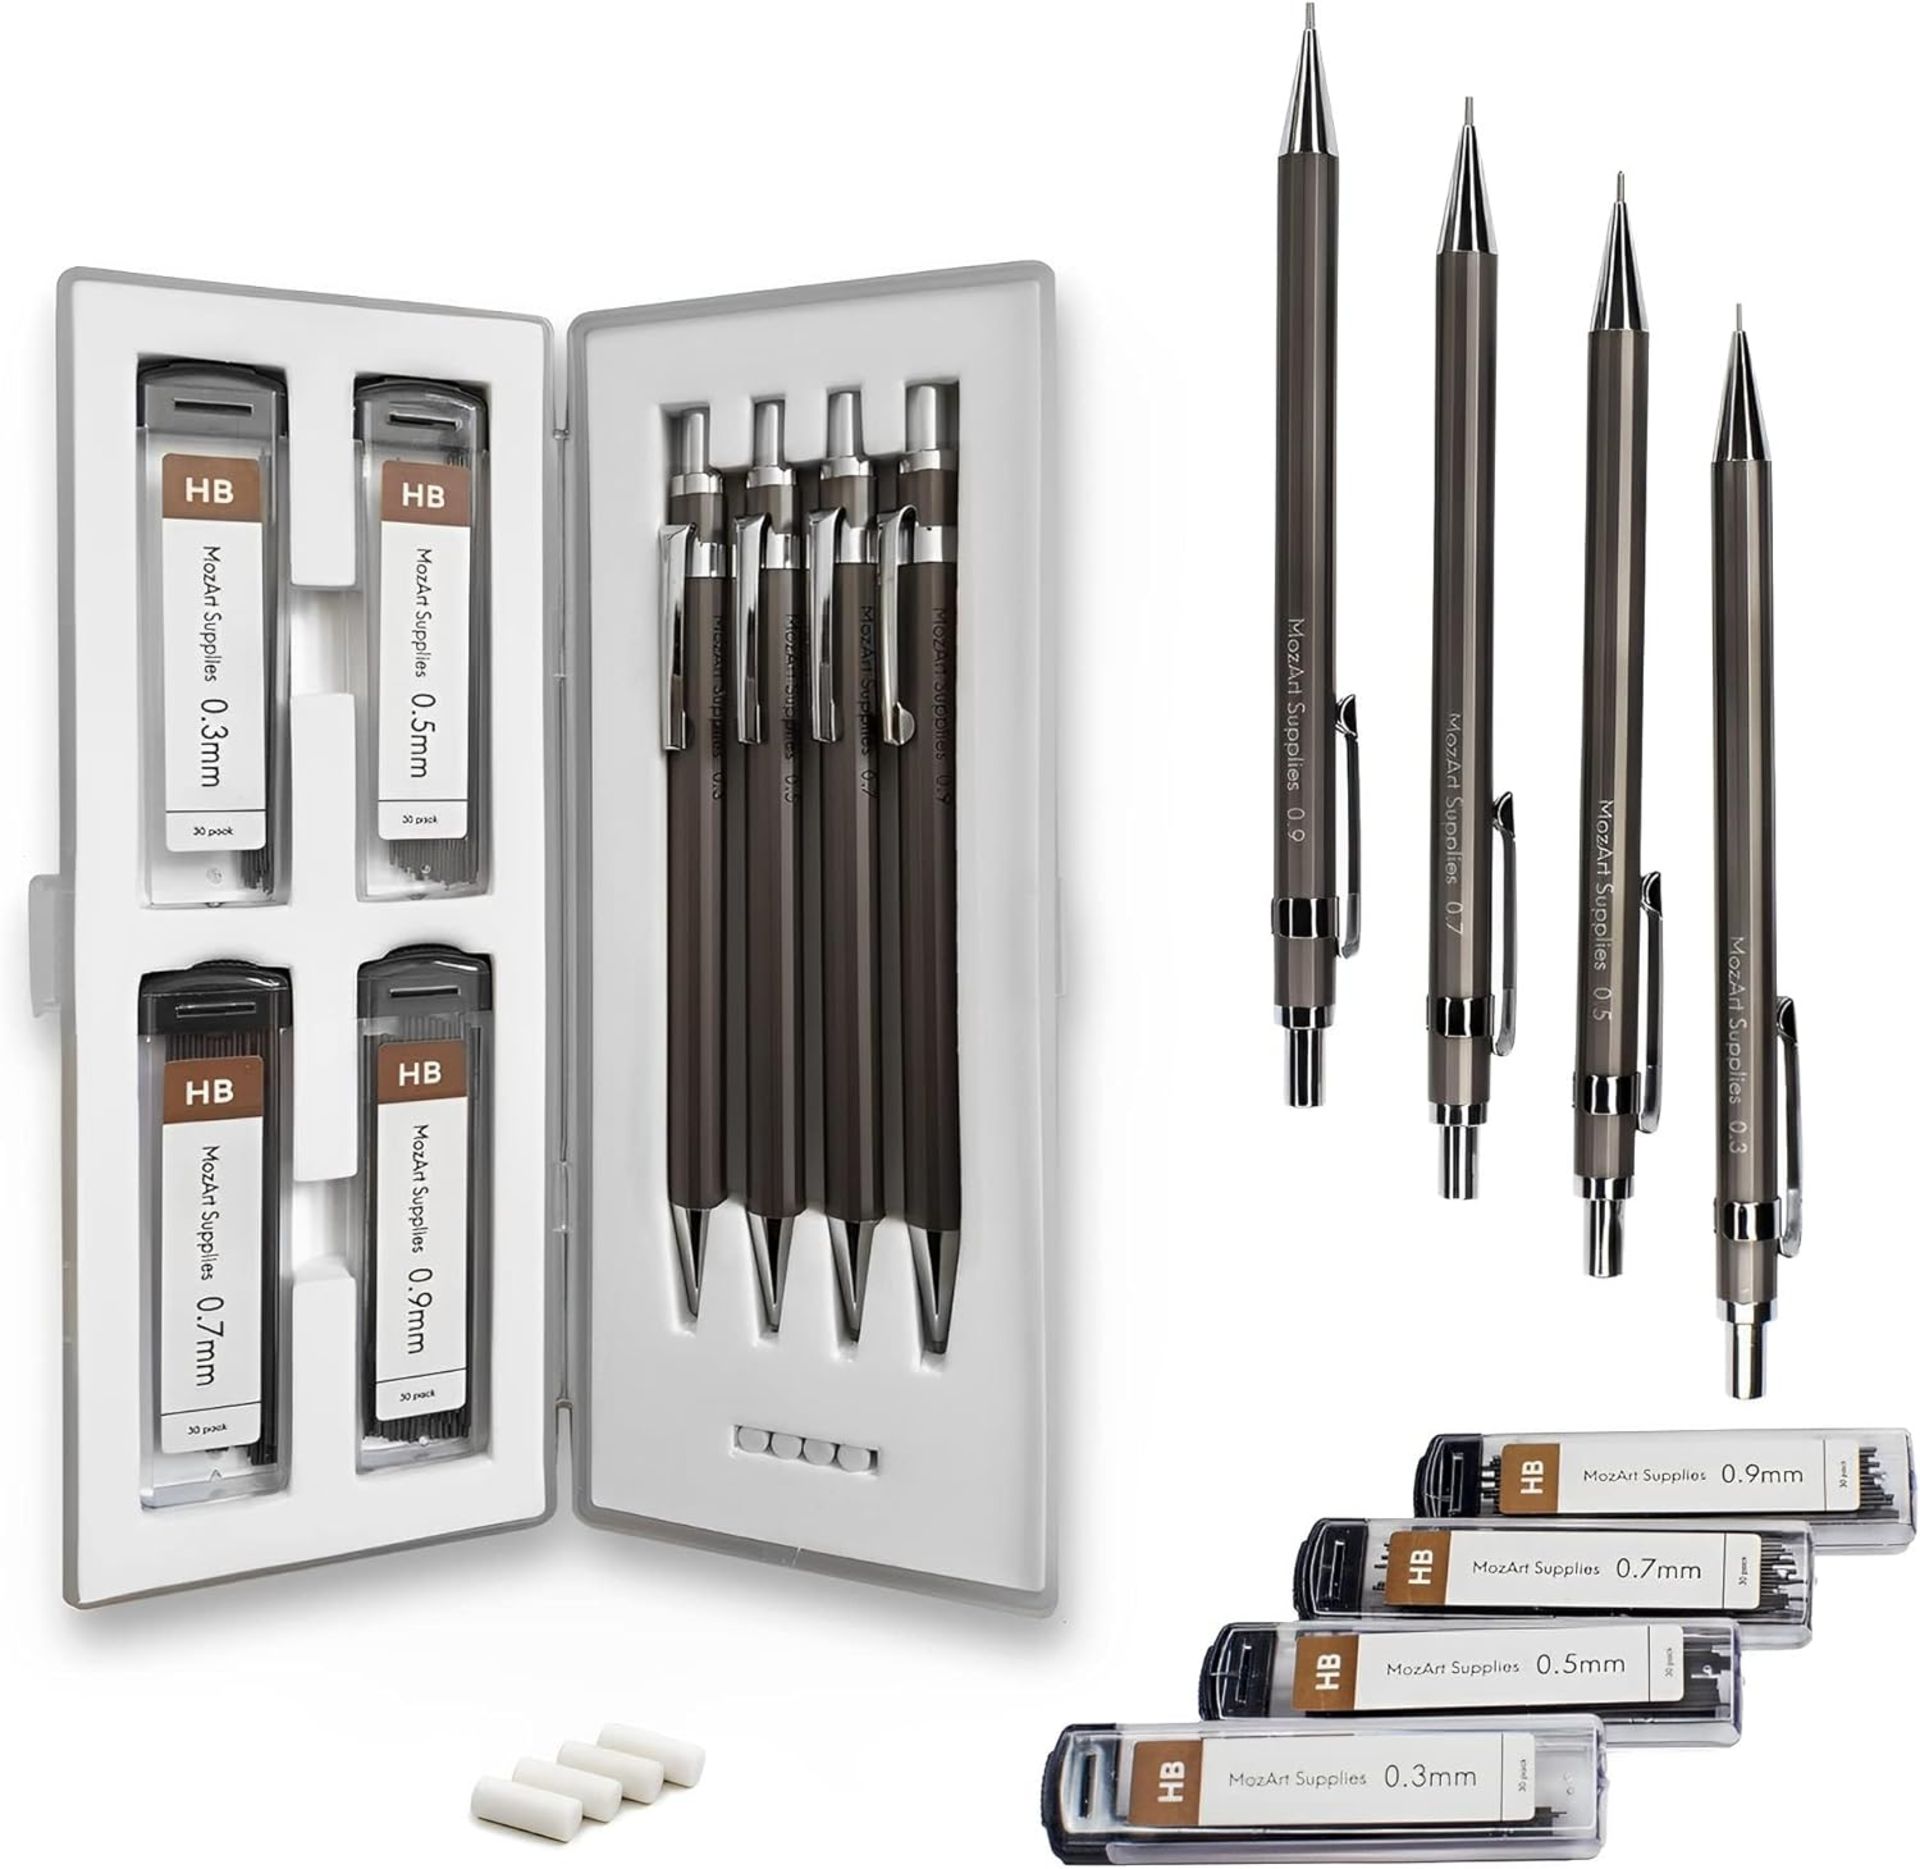 20 X BRAND NEW MOZART PREMIUM SCETCHING PENCIL SETS INCLUDING 4 PENCILS, REPLACEMENT ERASERS AND